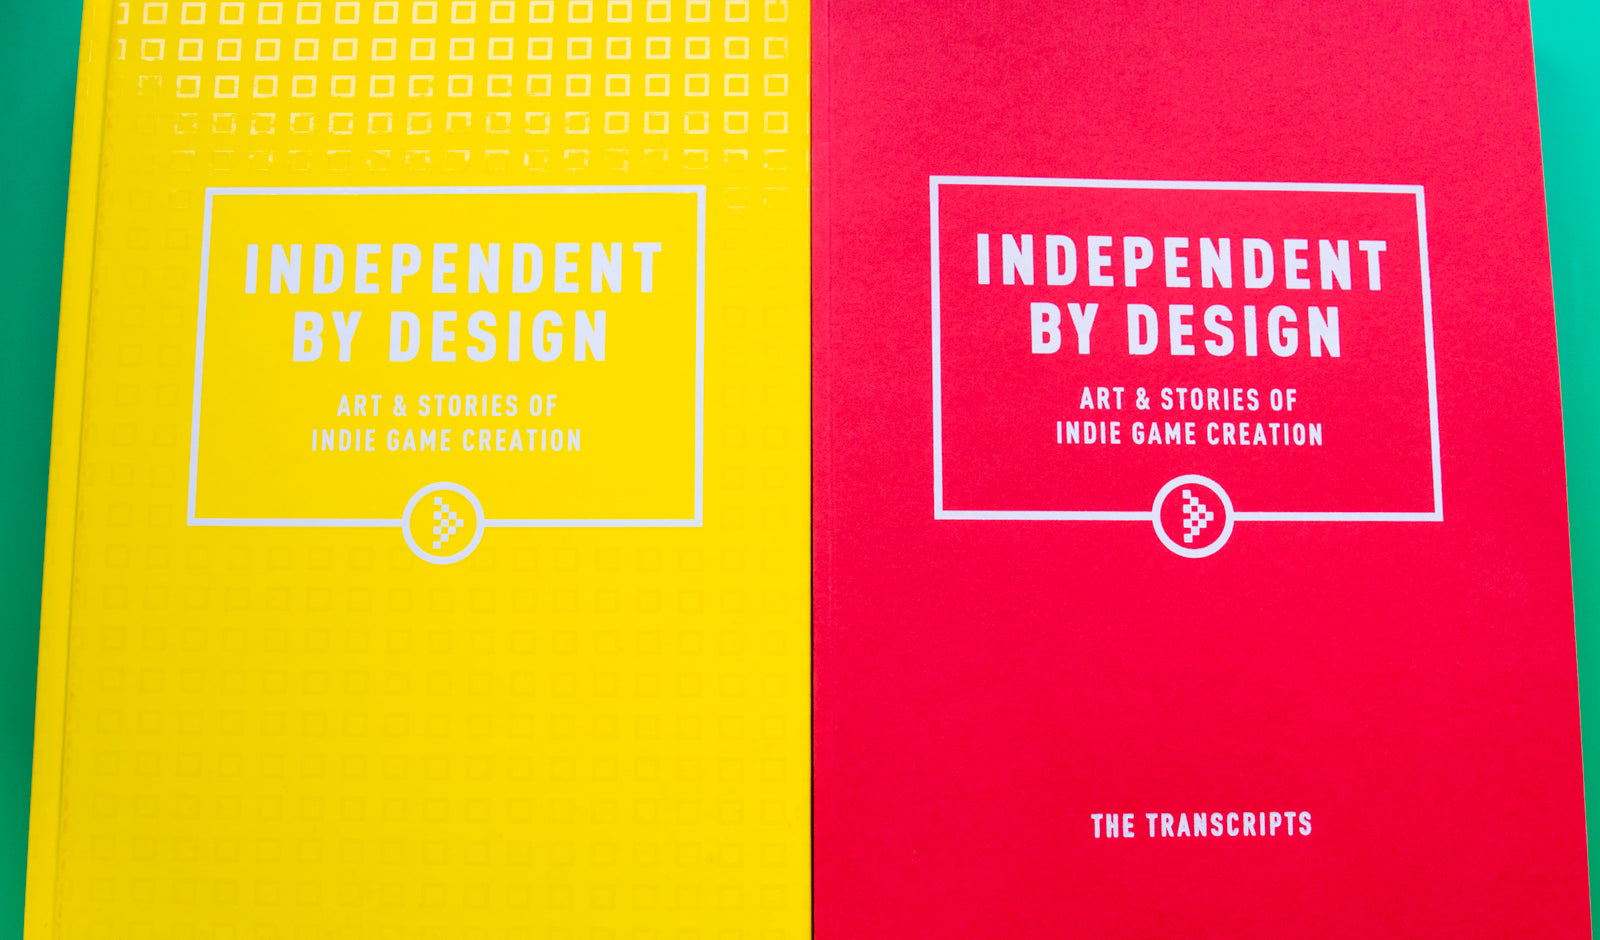 Independent By Design: Art & Stories of Indie Game Creation - Transcript Edition